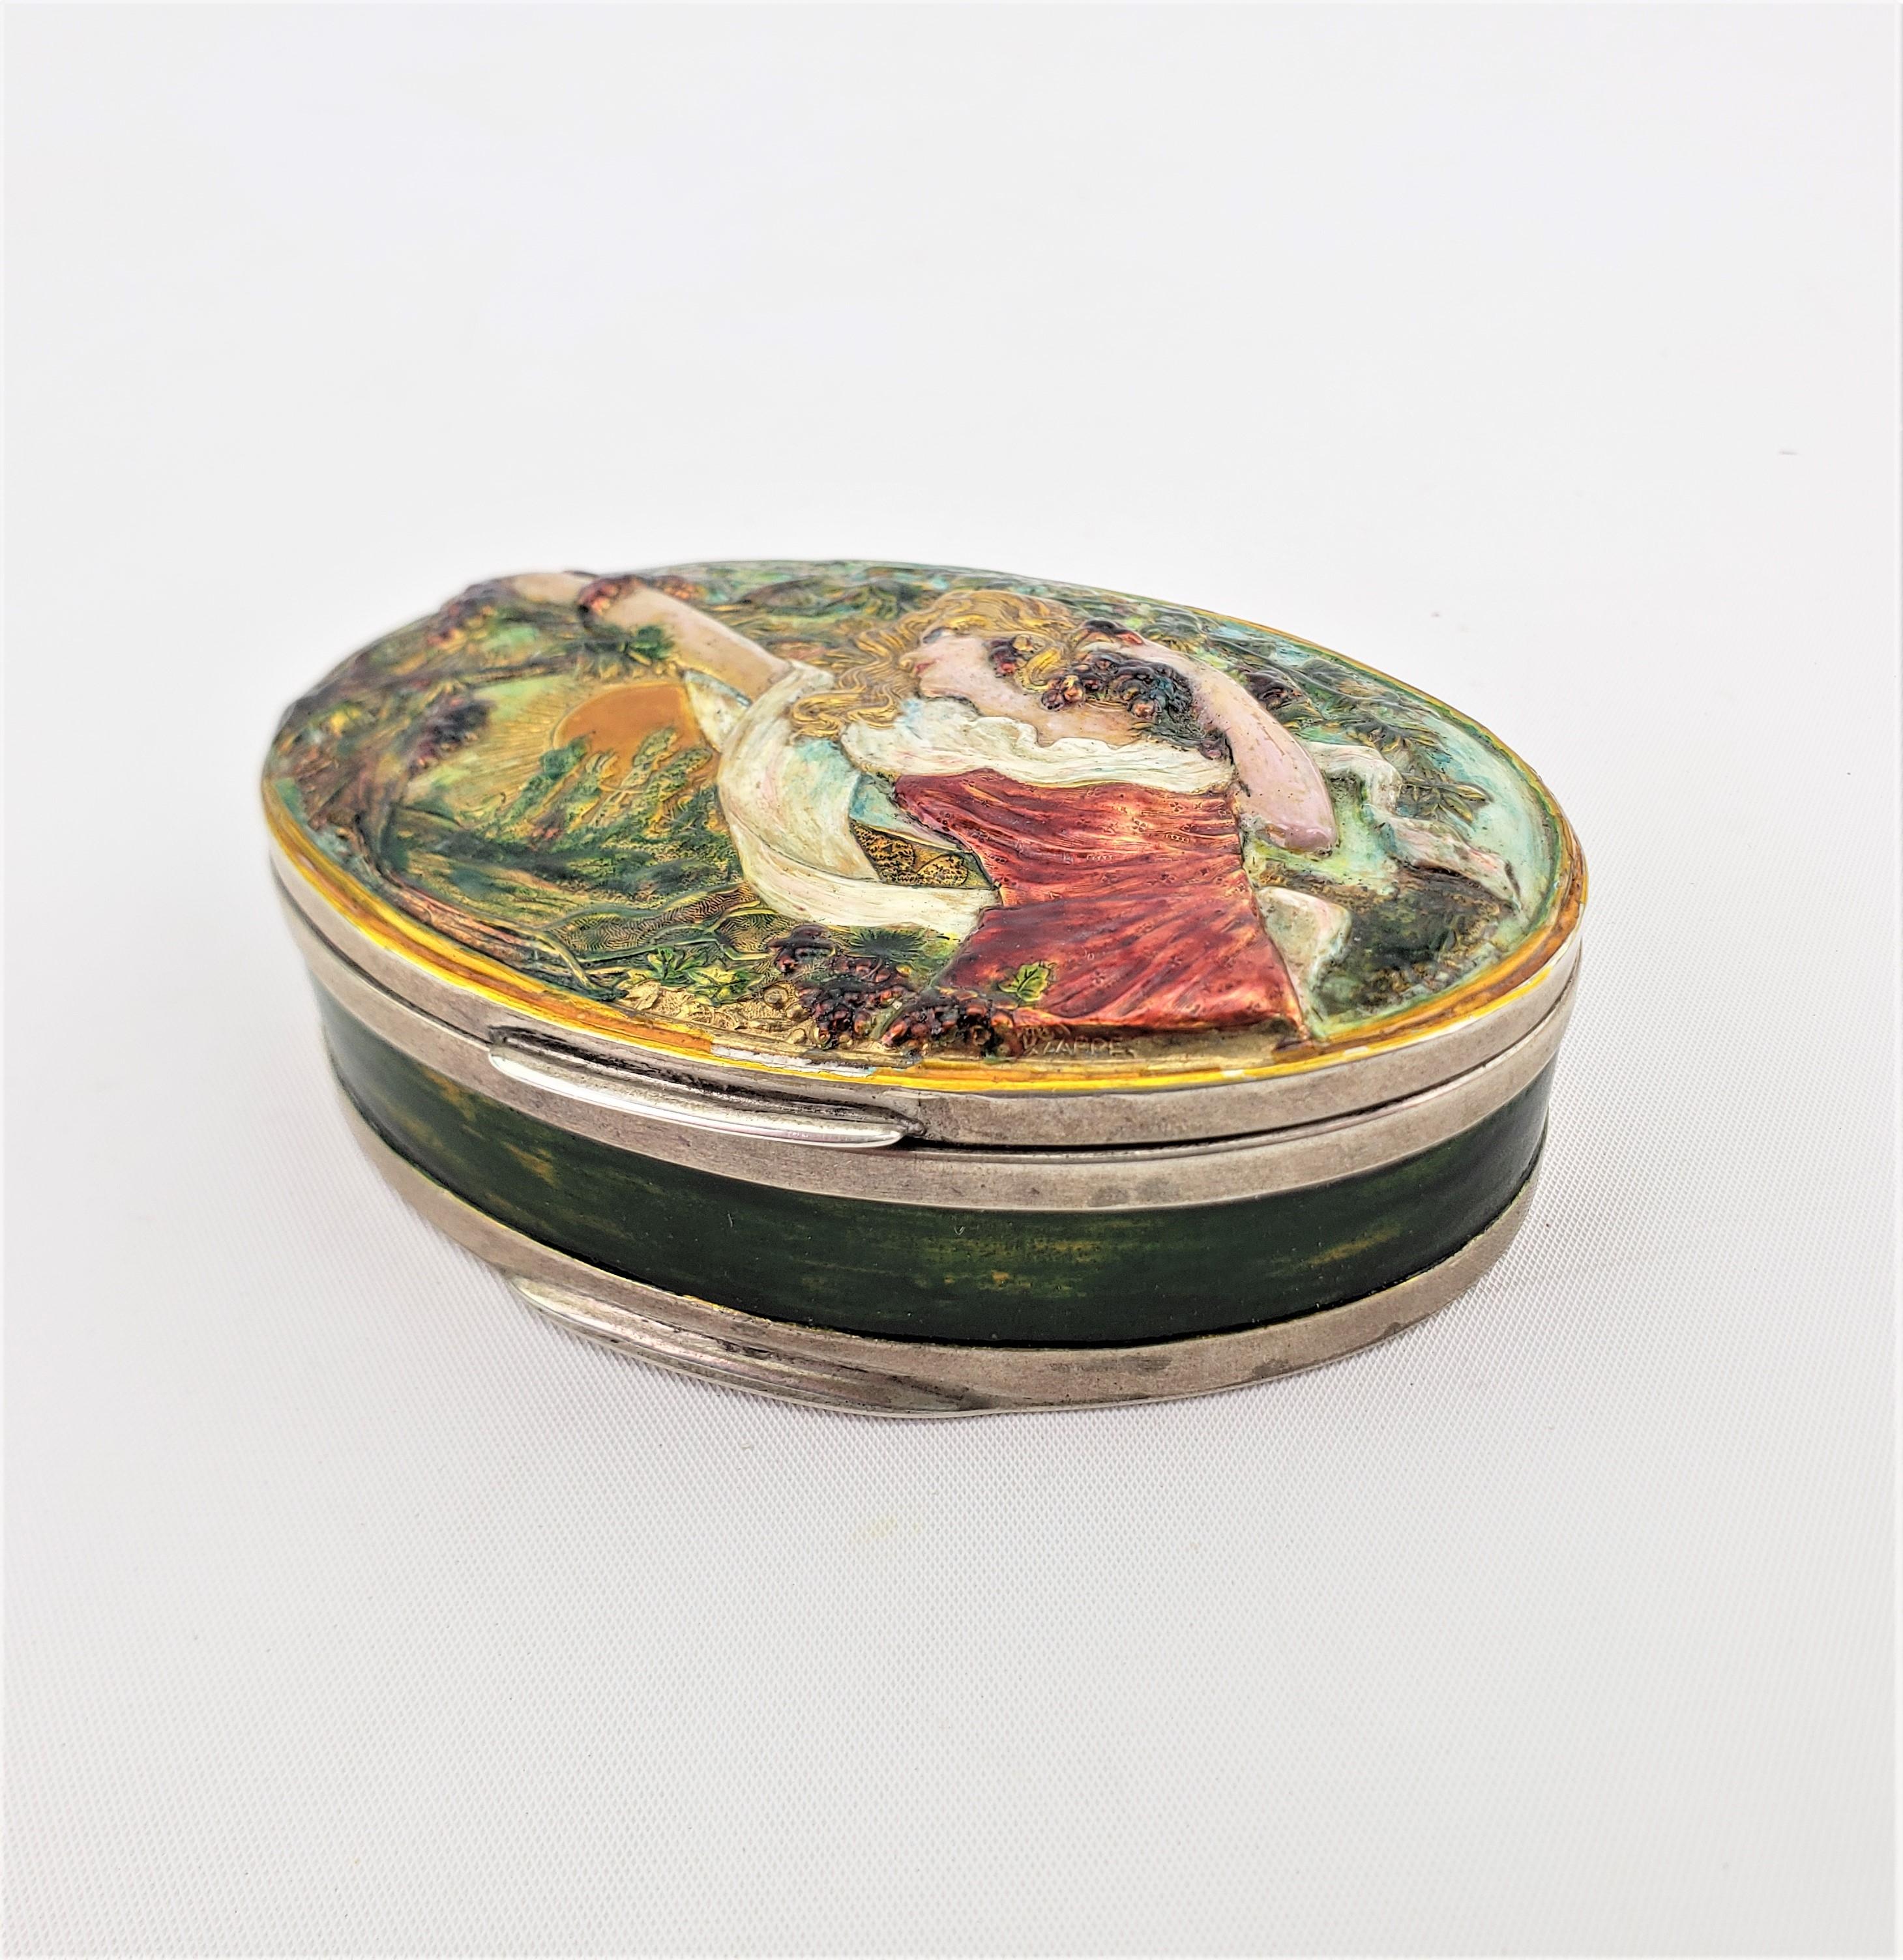 Antique Art Nouveau Silver & Enameled Oval Box Depicting a Woman Picking Grapes In Good Condition For Sale In Hamilton, Ontario